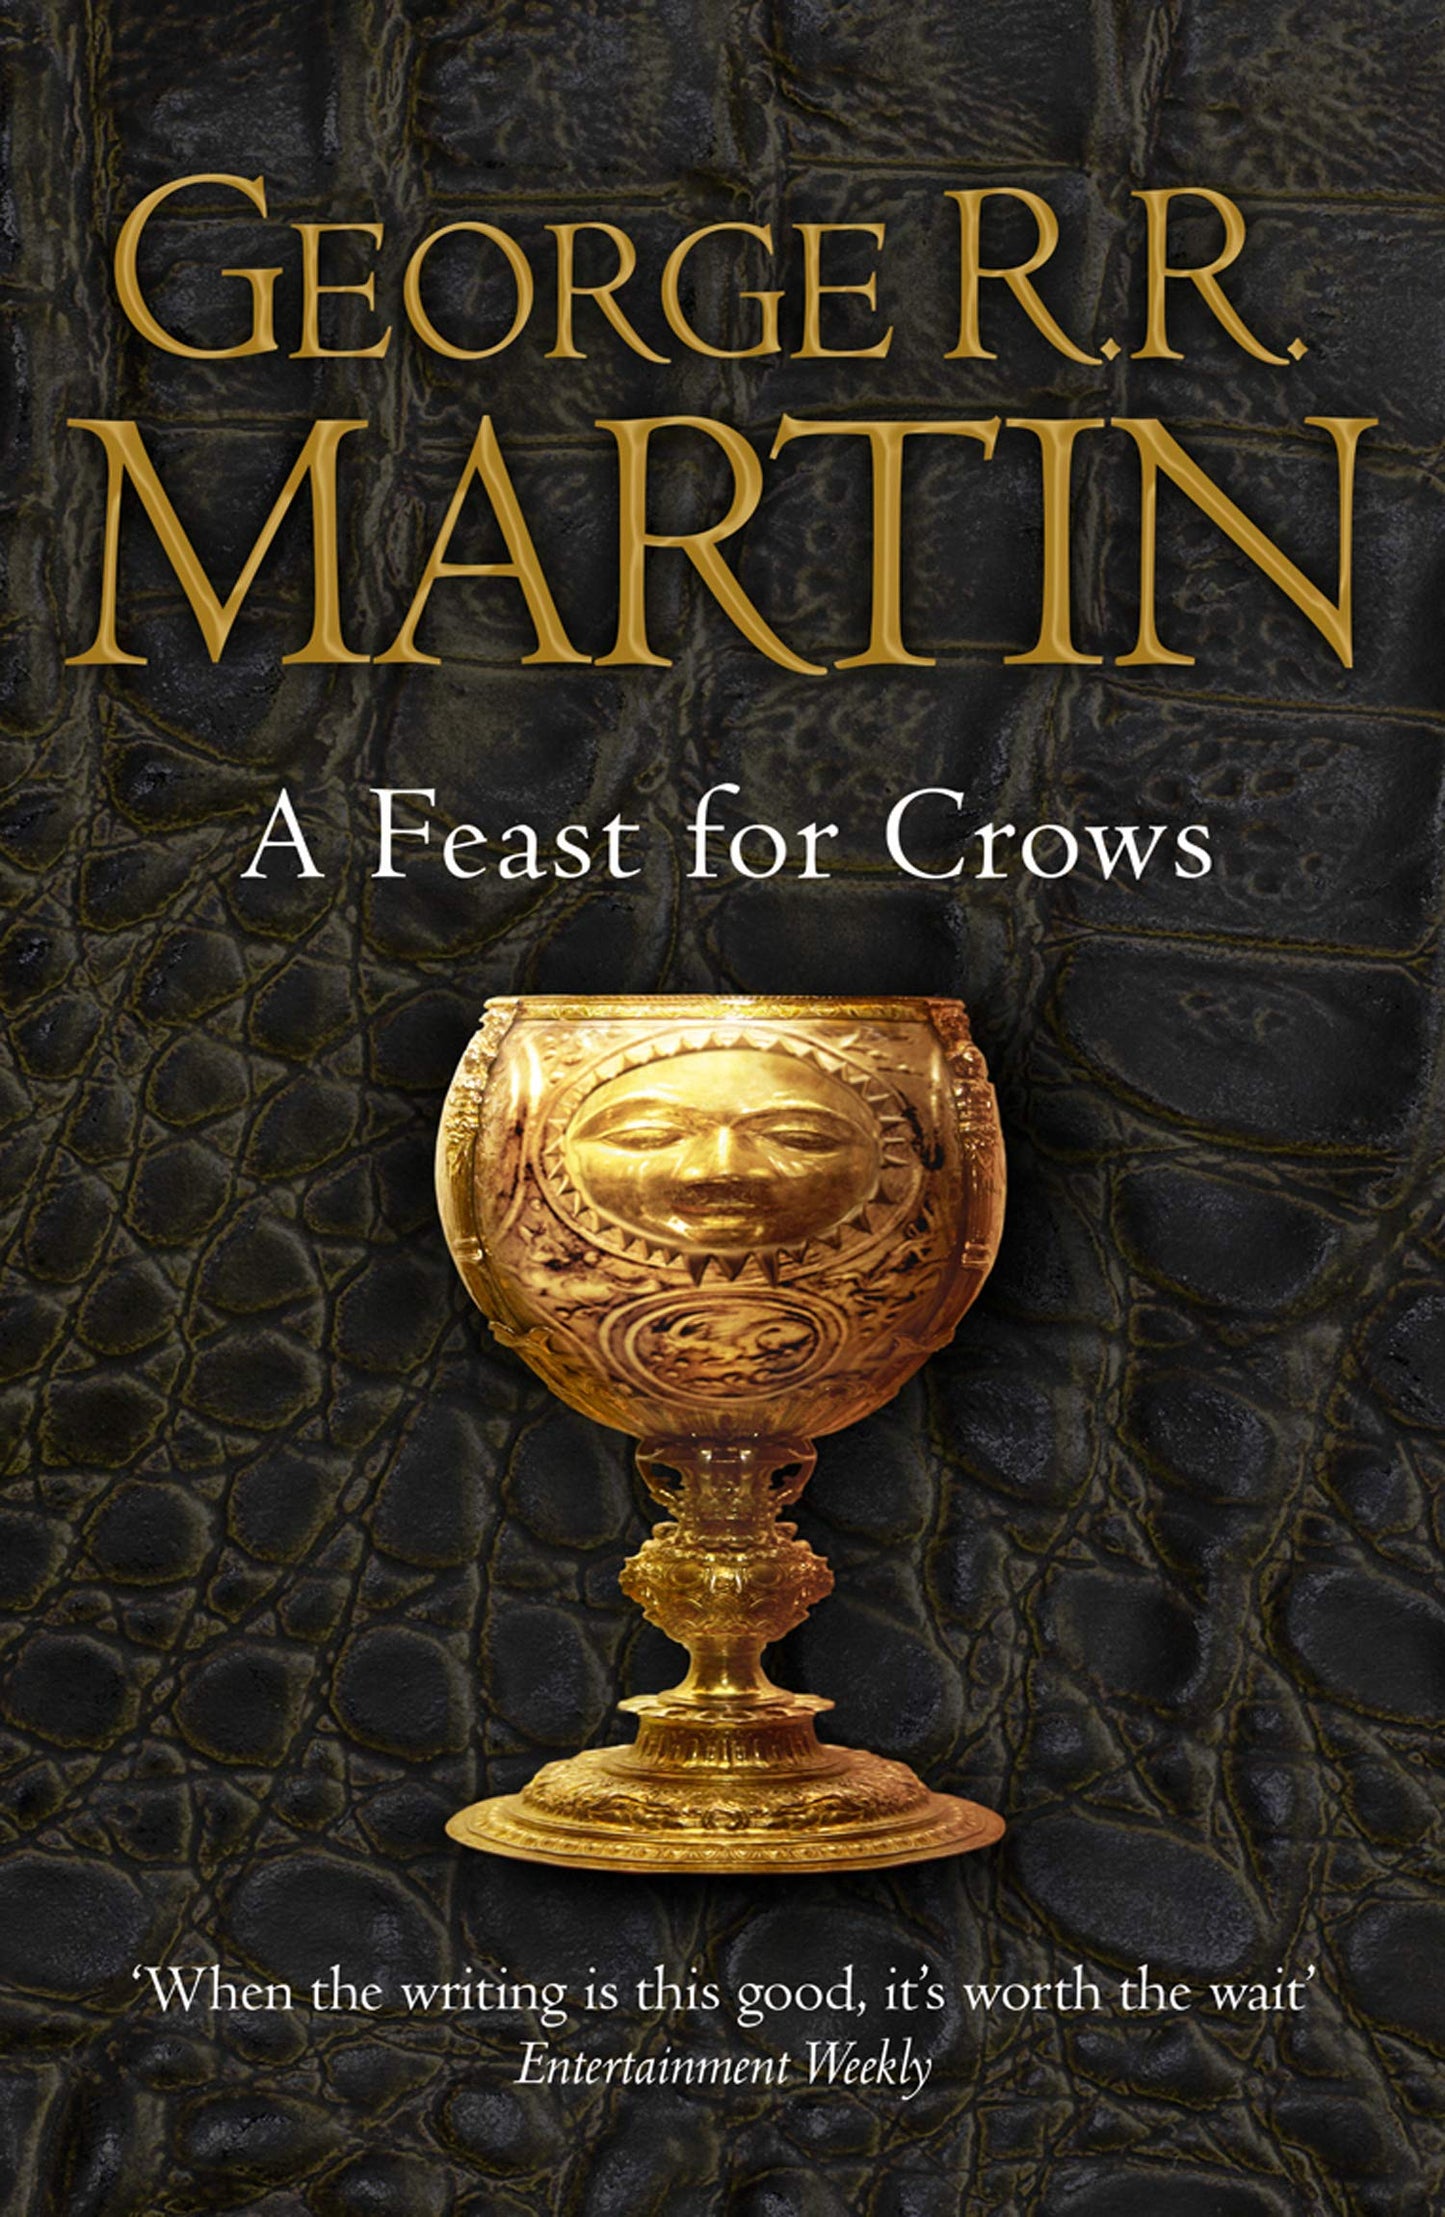 A Feast For Crows - (A Song of Ice and Fire #4) - George R.R. Martin